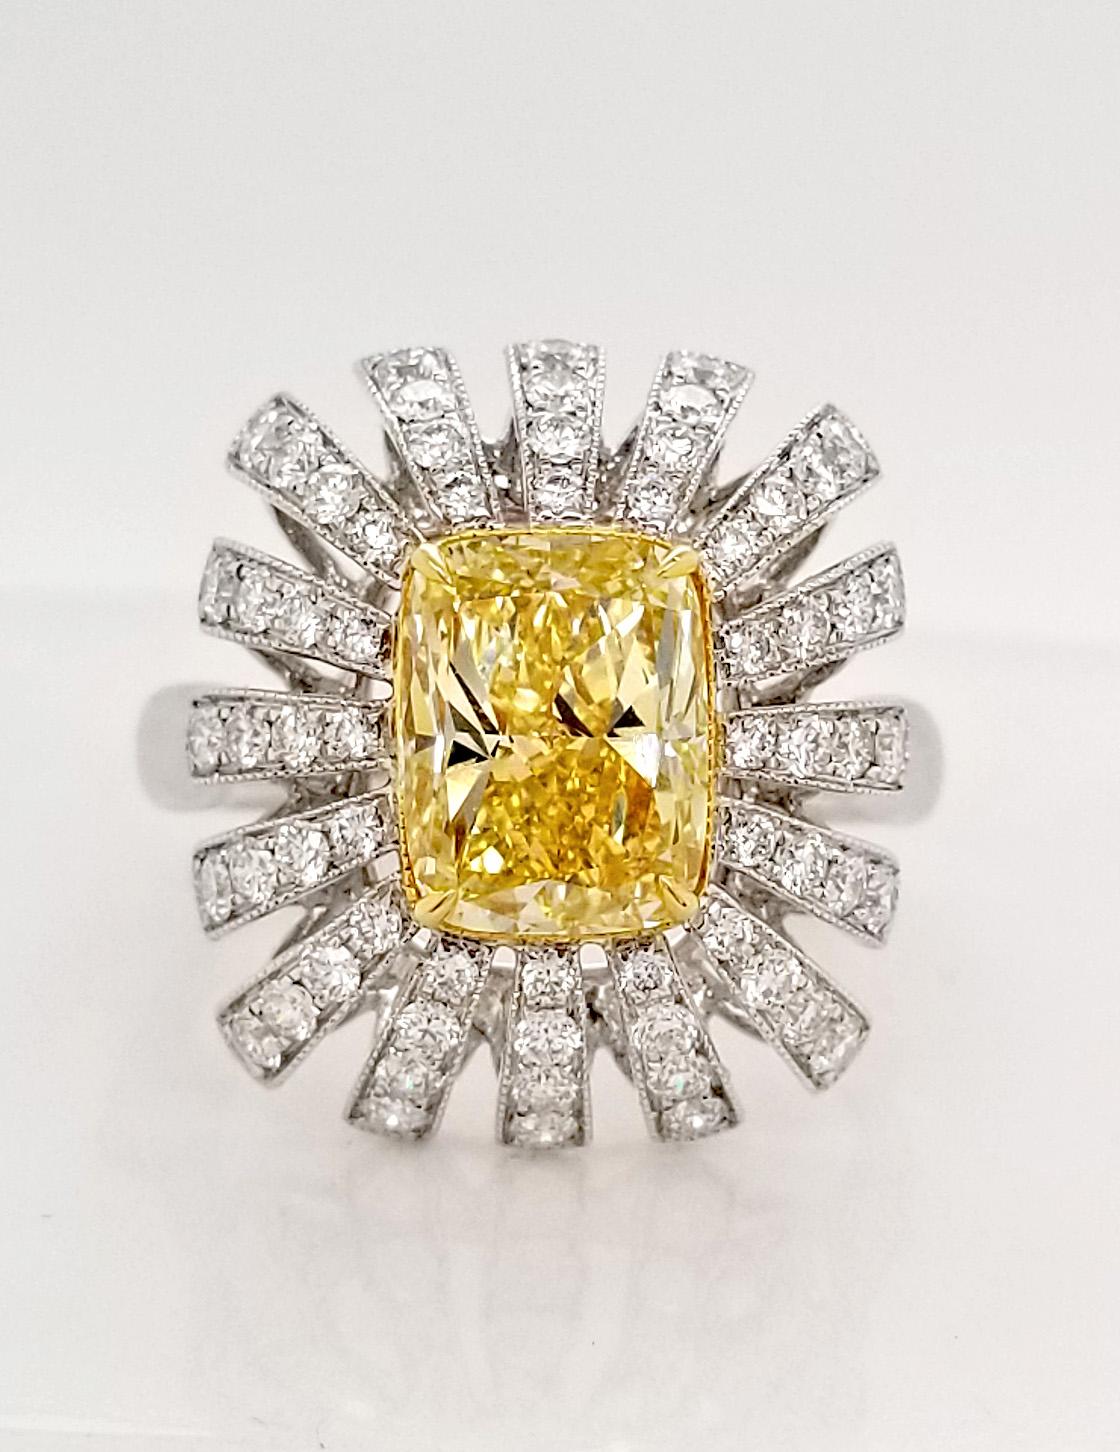 GIA-Certified 2.34 ct. Fancy Intense Yellow Cushion Cut Diamond Engagement or Cocktail Ring from Scarselli. Unique 2.34 ct. ring featuring GIA-Certified Fancy Intense Yellow Diamond VS2 on an 18k White Gold Band. Ring resizable upon request.

This